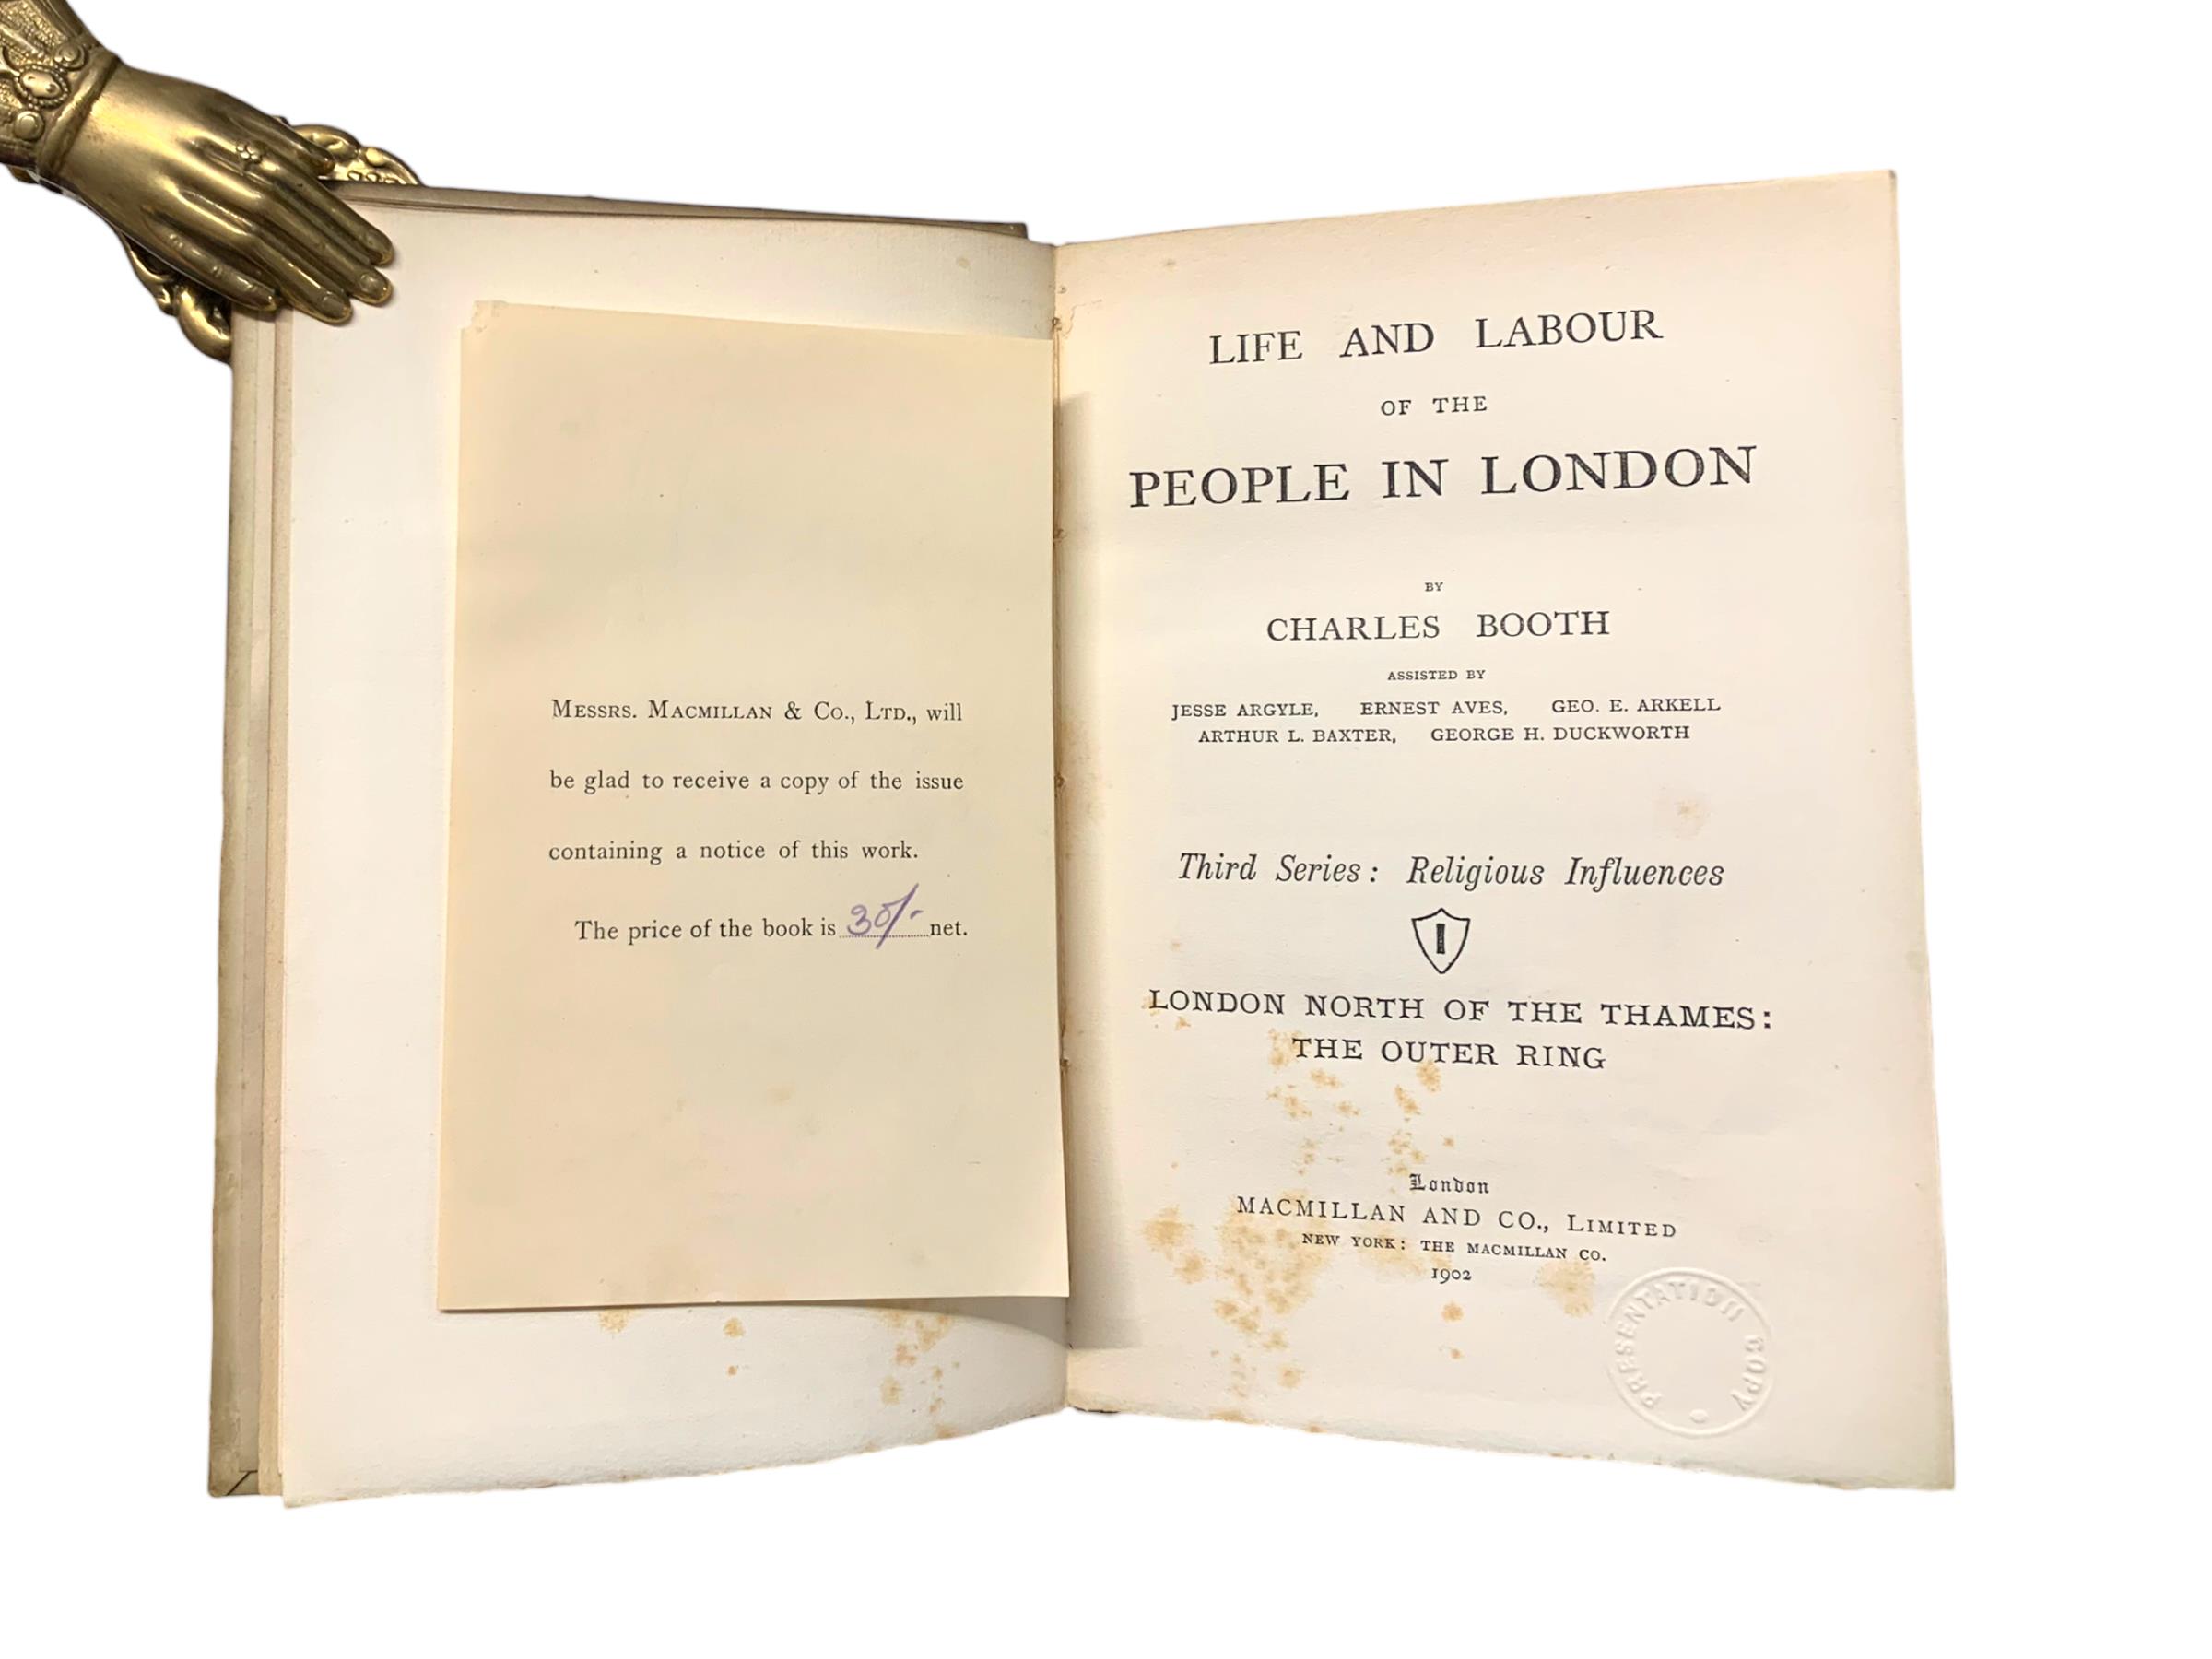 Booth (Charles) Life and Labour of the People in London, Third Series, 1902 - Image 4 of 7